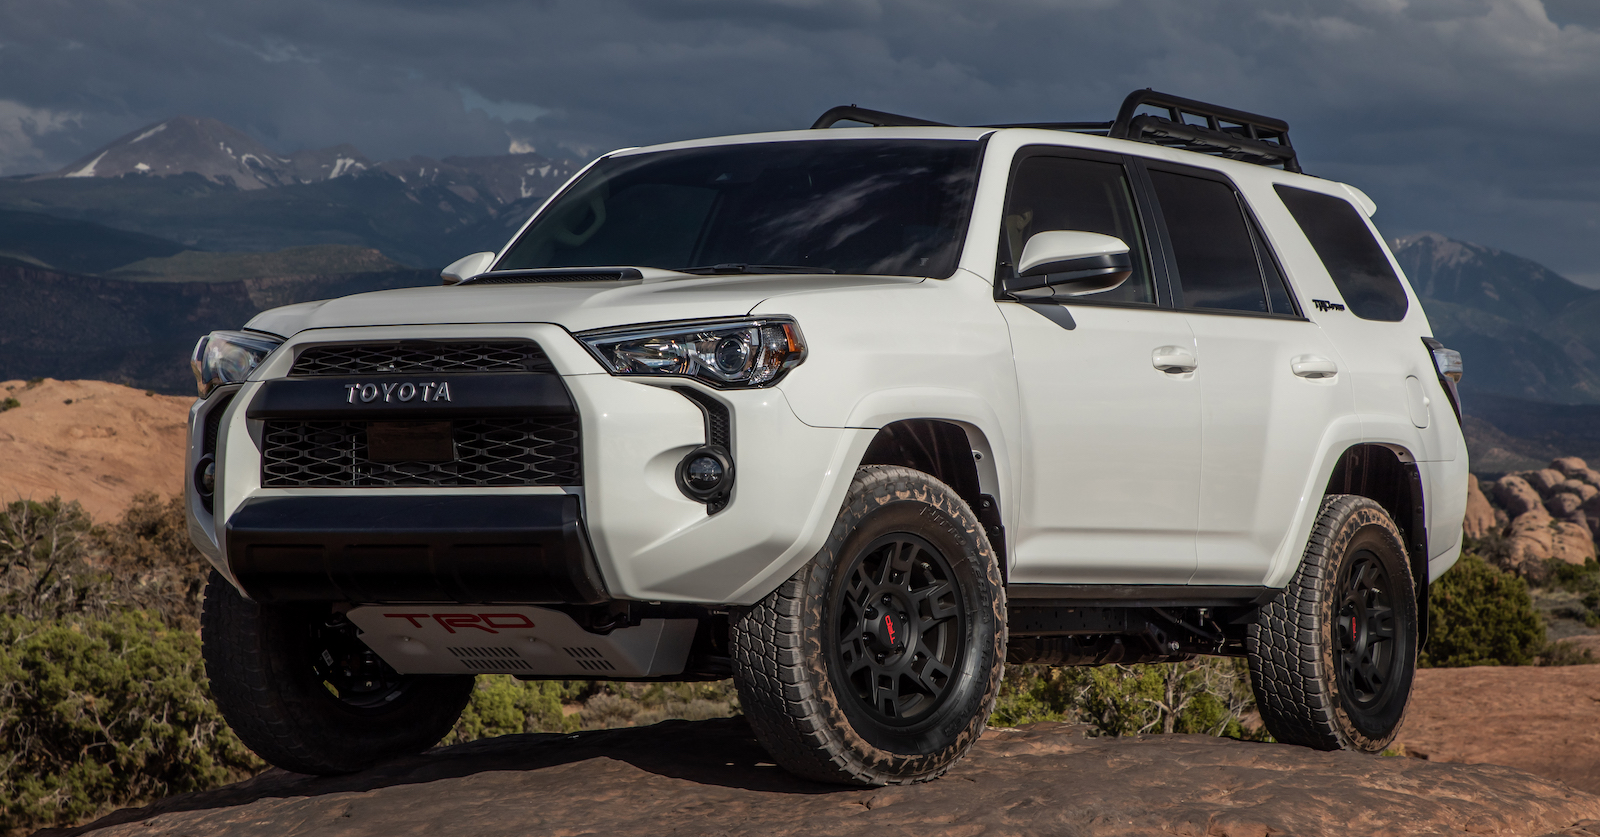 Classic Name and Style in the Toyota 4Runner